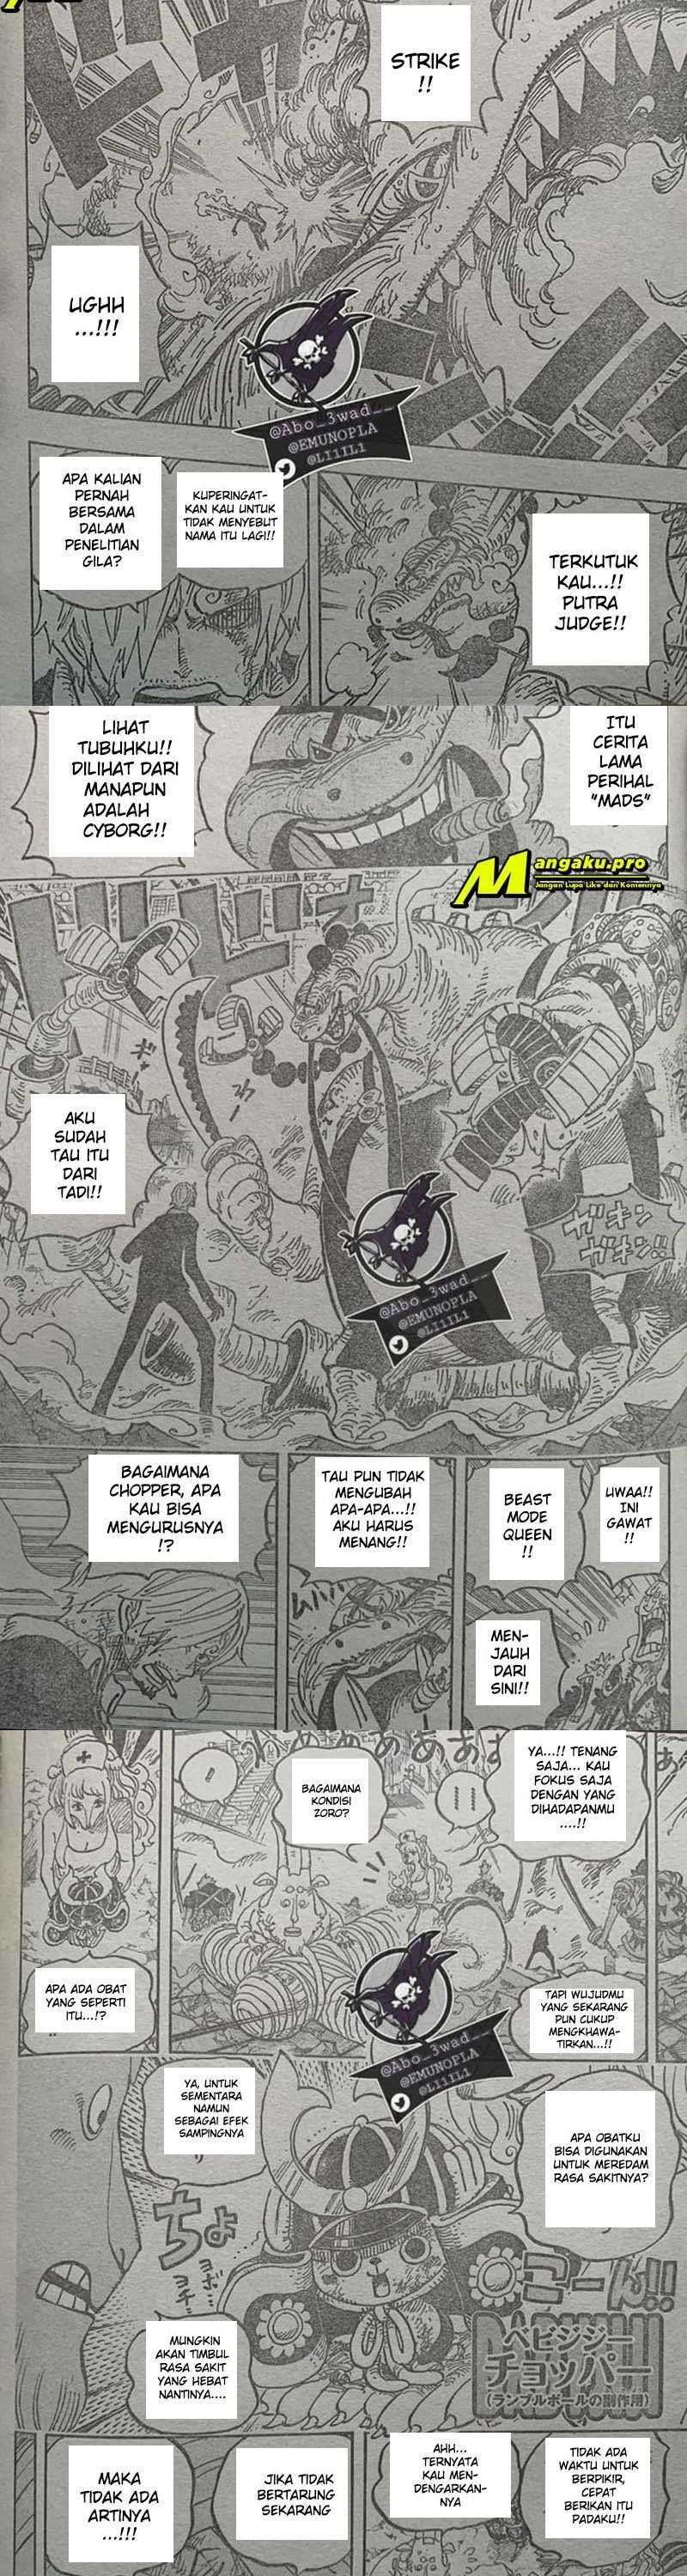 One Piece Chapter 1017 Lq - 57